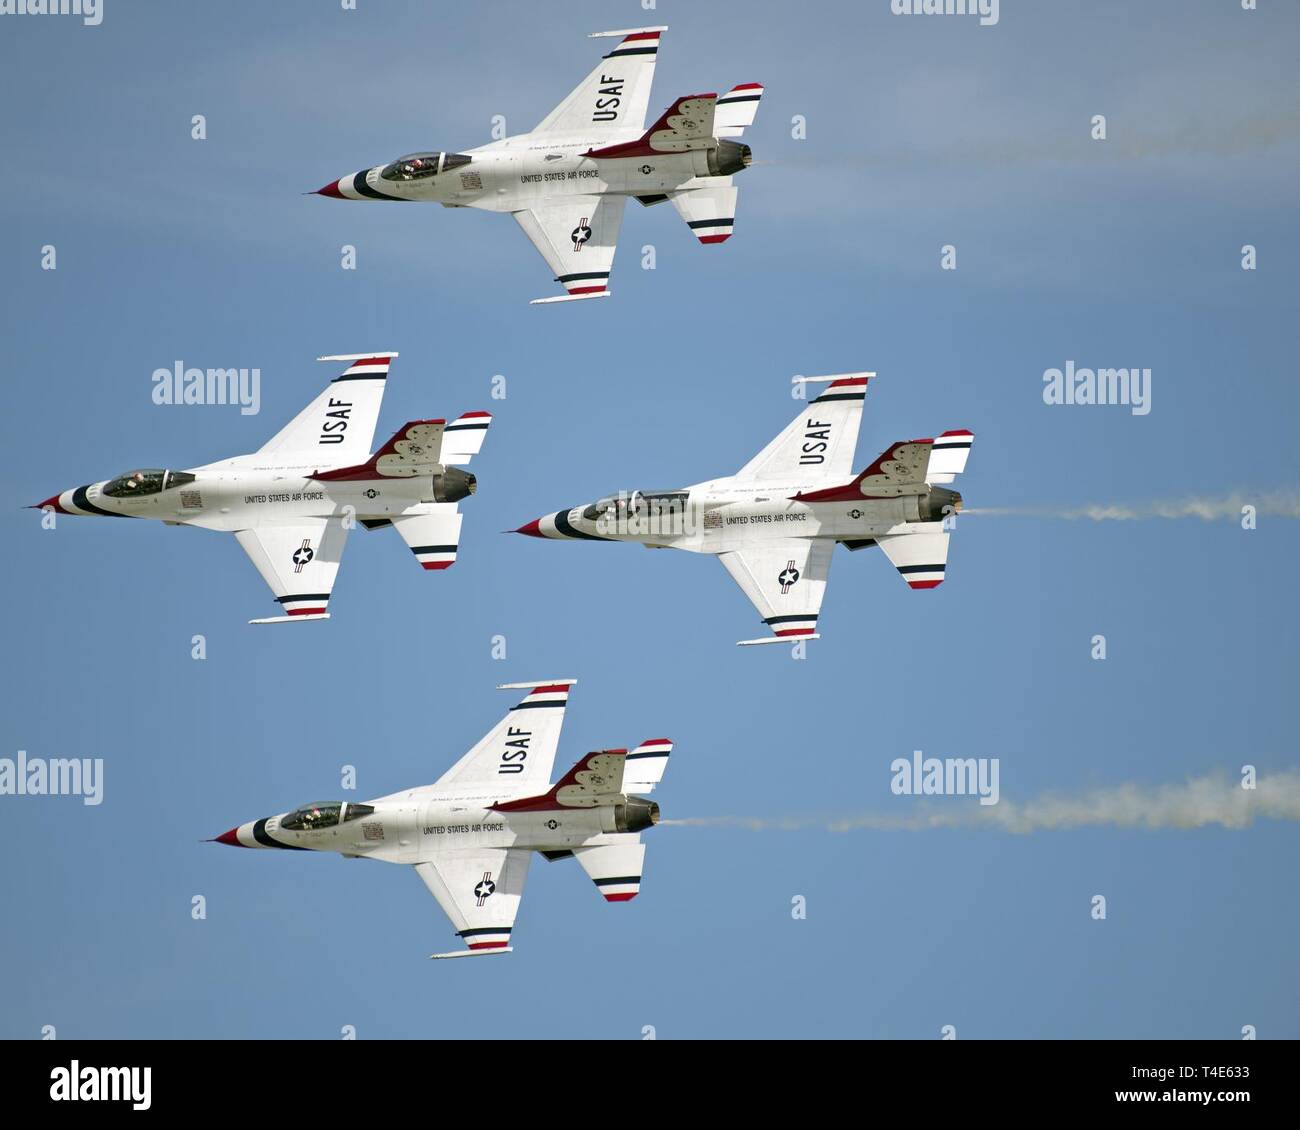 The USAF Thunderbirds demonstration team perform during the “Thunder over the Bay” Air Show, Travis Air Force Base, California, March 31, 2019. In addition to the U.S. Air Force Thunderbirds aerial demonstration team, the two-day event featured performances by the U.S. Army Golden Knights parachute team, flyovers, and static displays. The event honored hometown heroes like police officers, firefighters, nurses, teachers and ordinary citizens whose selfless work made their communities safer and enhanced the quality of life. Stock Photo